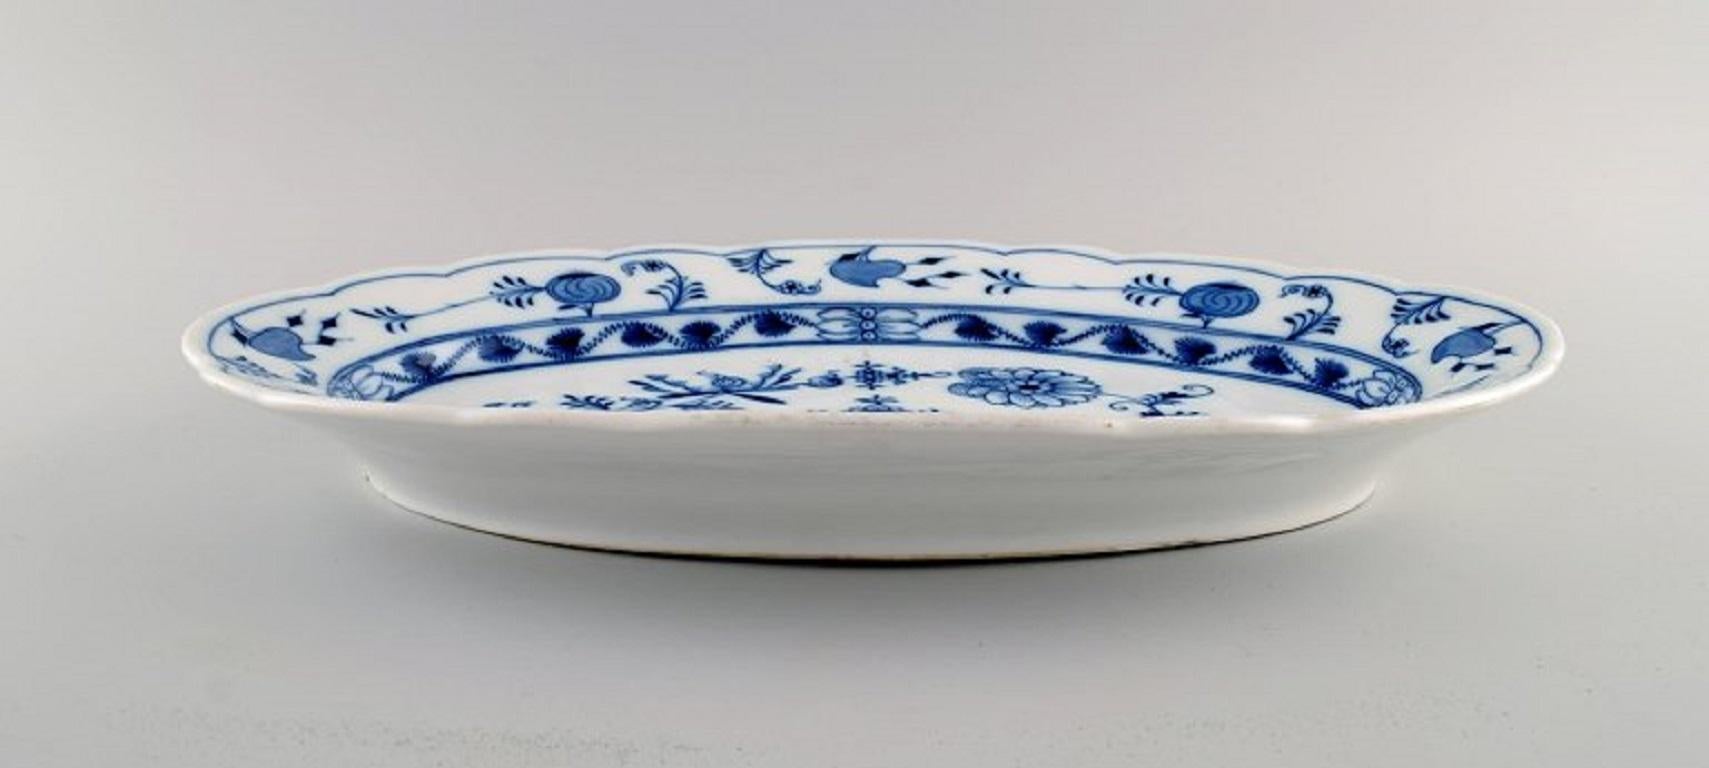 20th Century Very Large Stadt Meissen Blue Onion Serving Dish in Hand-Painted Porcelain